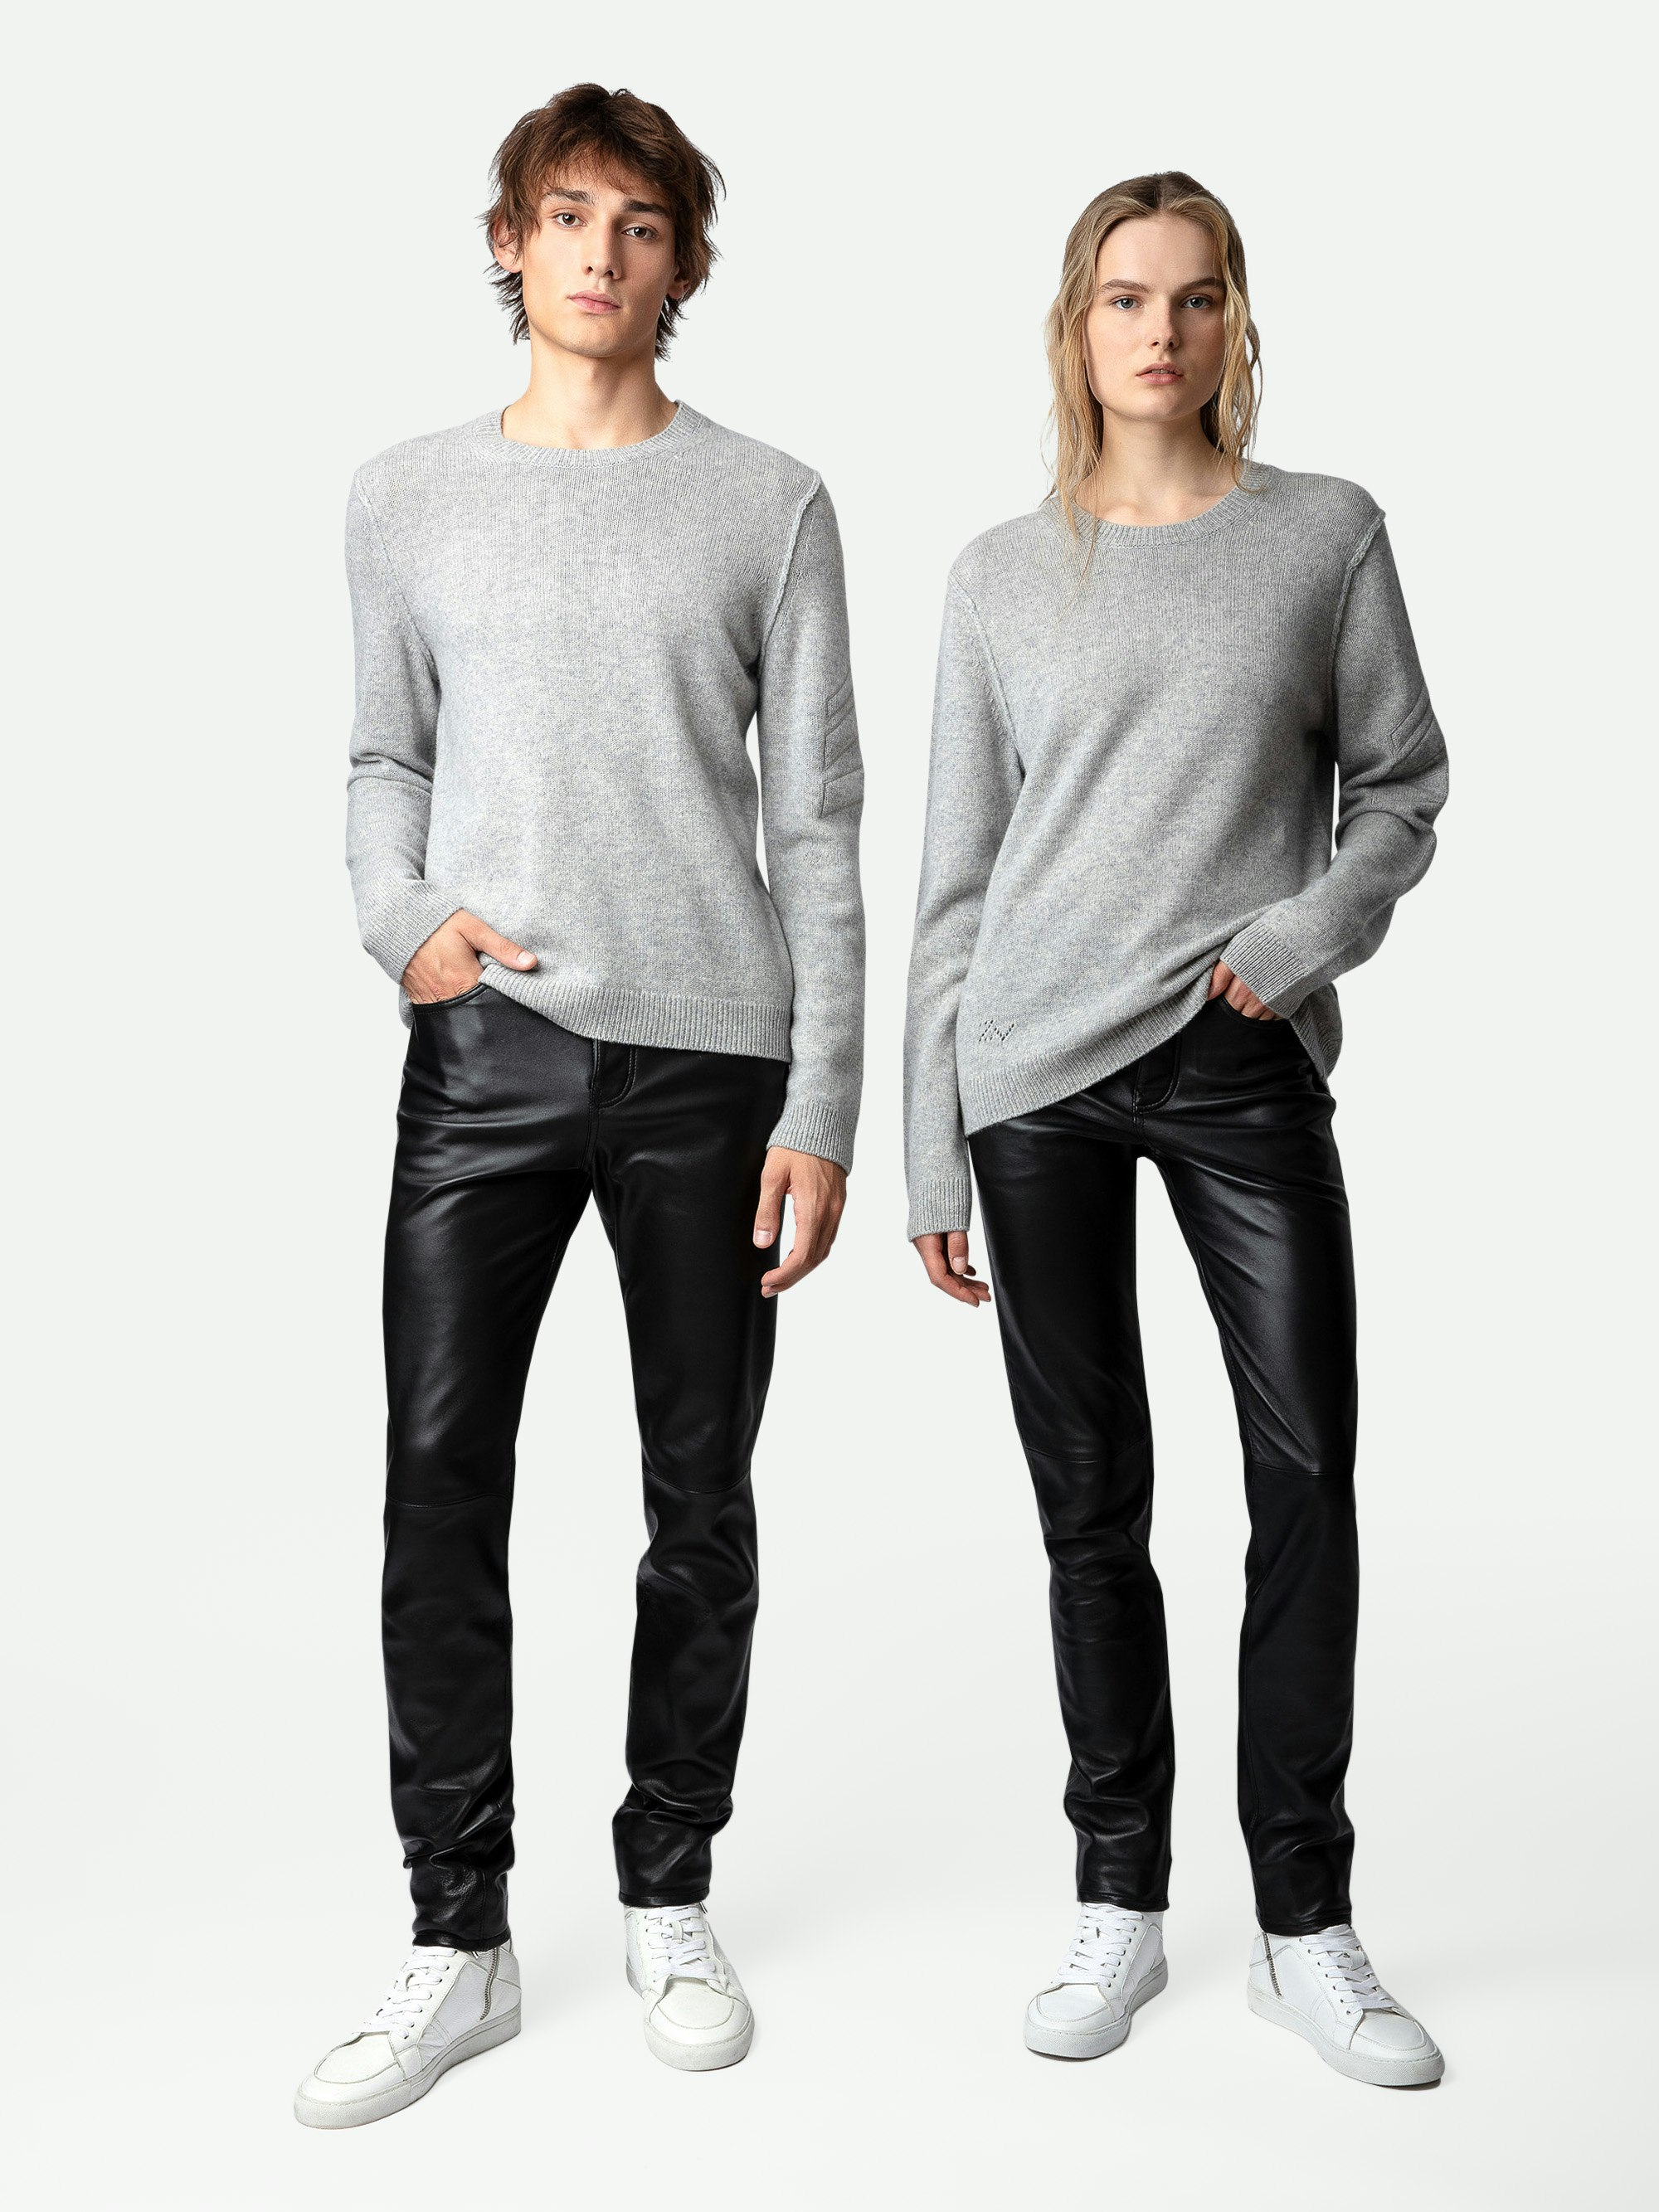 Kennedy Arrow Cashmere Jumper - Unisex's light marl grey 100% cashmere jumper with arrows on the sleeve.